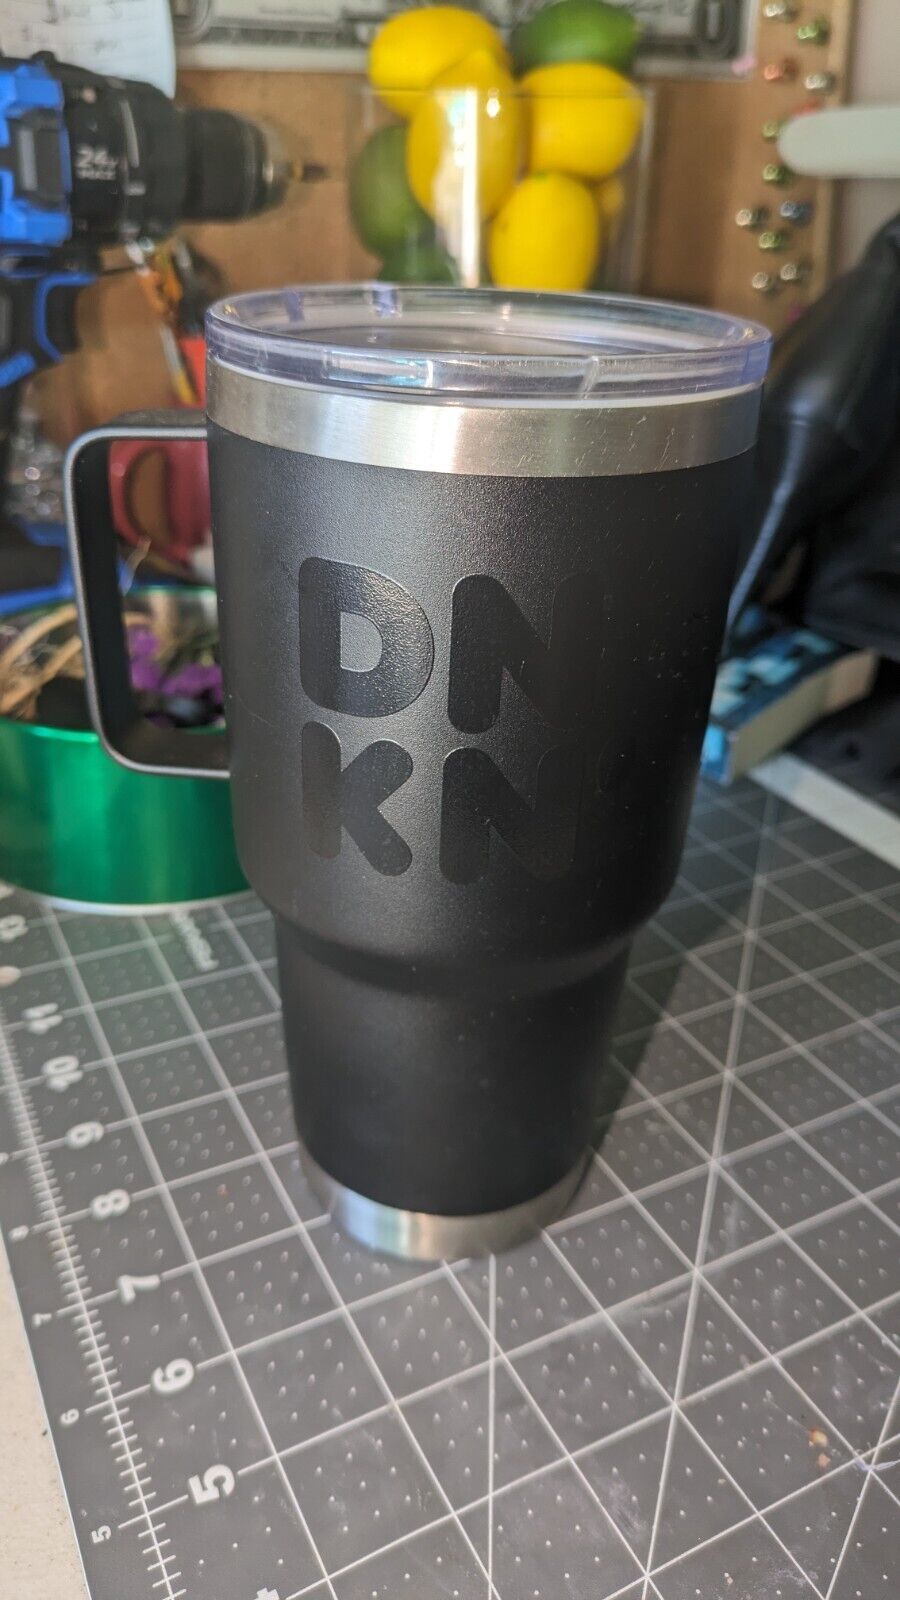 NEW Dunkin Donuts Stainless Tumbler Mug Cup BLACK 28 oz Unique Collectible RARE